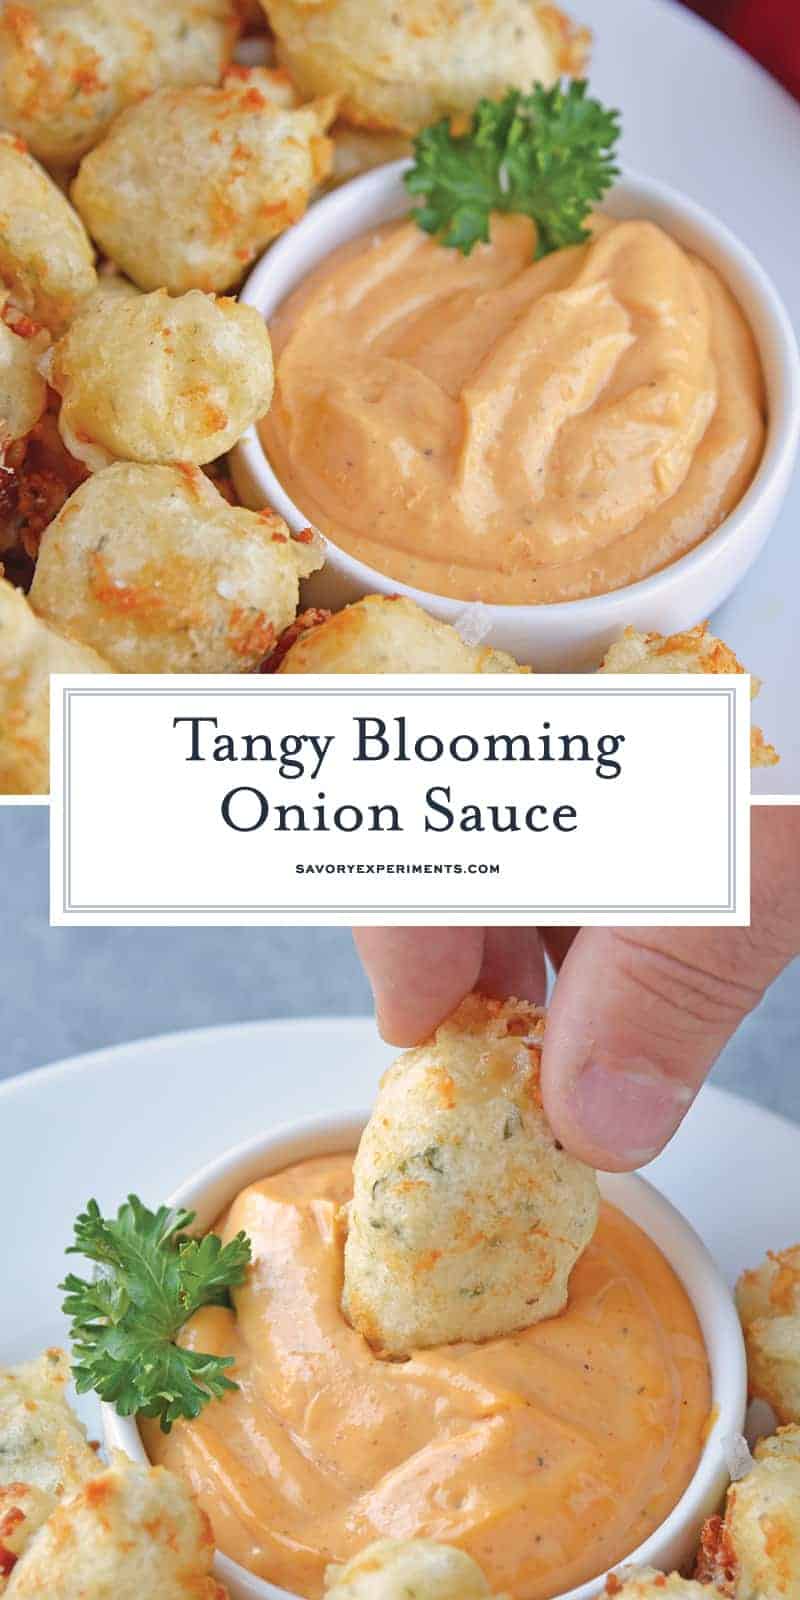 Outback Blooming Onion Sauce is a zesty and fun dipping sauce that can be made in just 5 minutes. Versatile and perfect for serving with nearly anything! #bloomsauce #bloomingonionsauce www.savoryexperiments.com